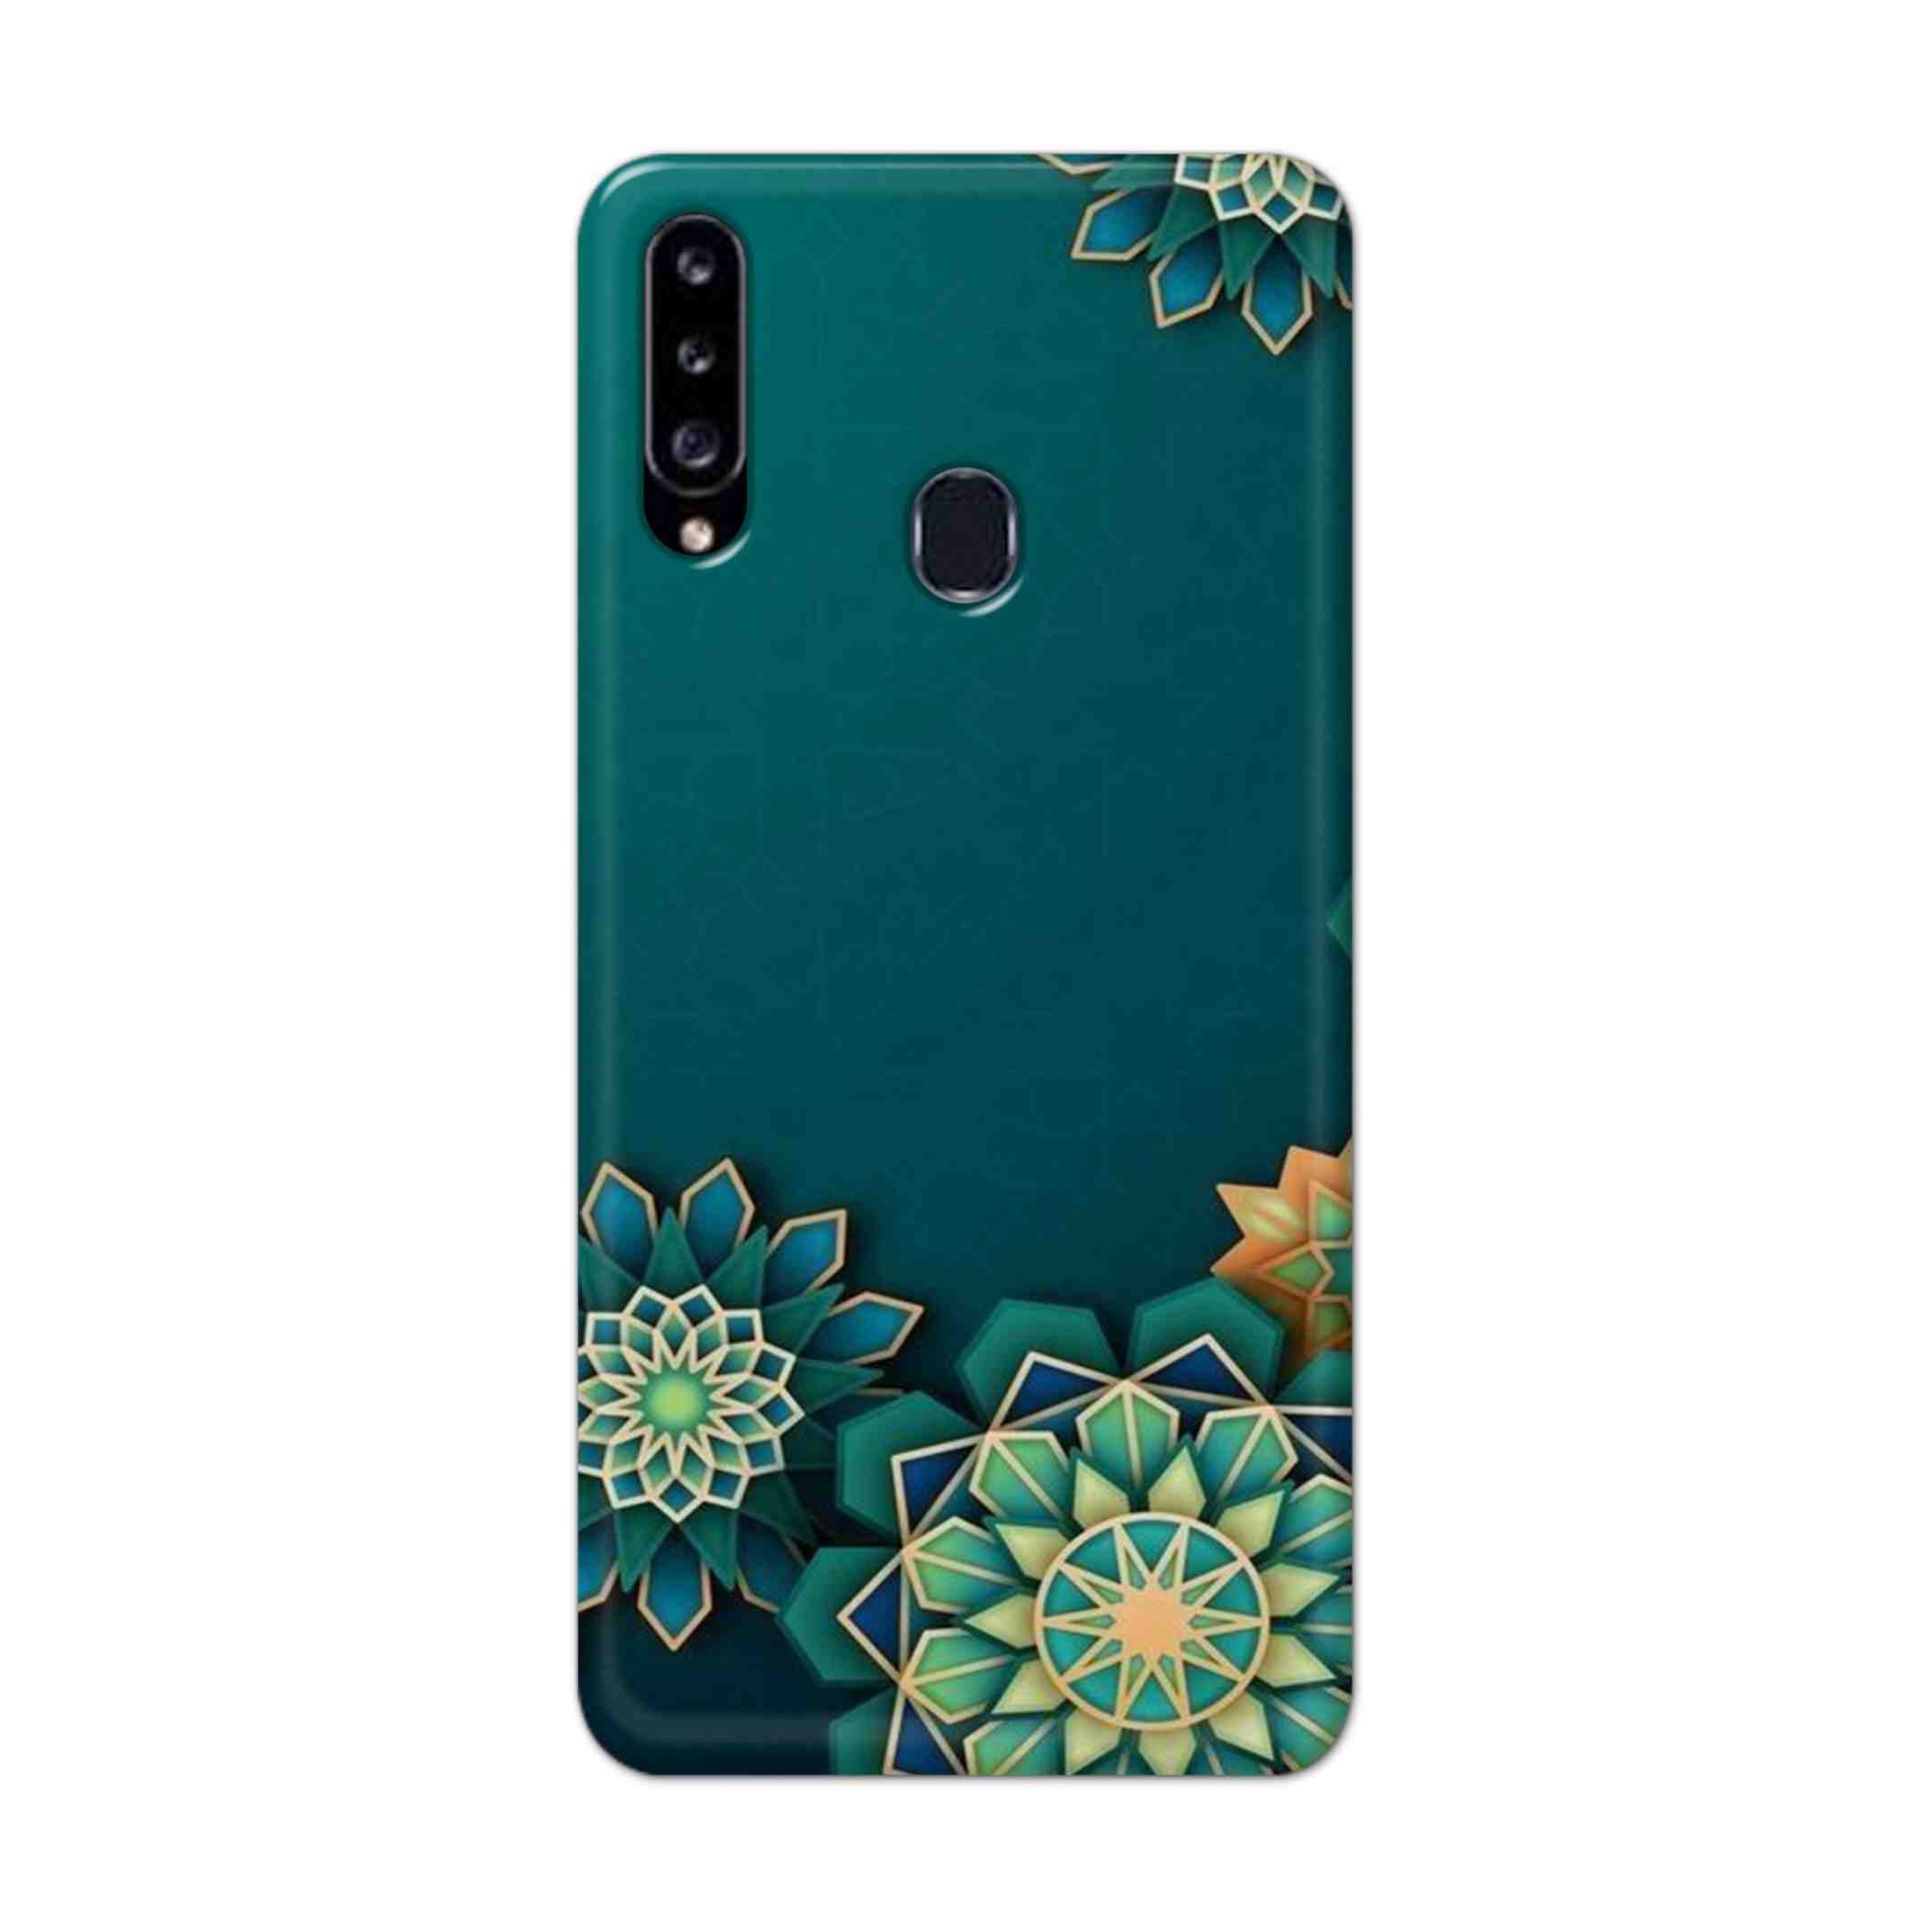 Buy Green Flower Hard Back Mobile Phone Case Cover For Samsung Galaxy A21 Online